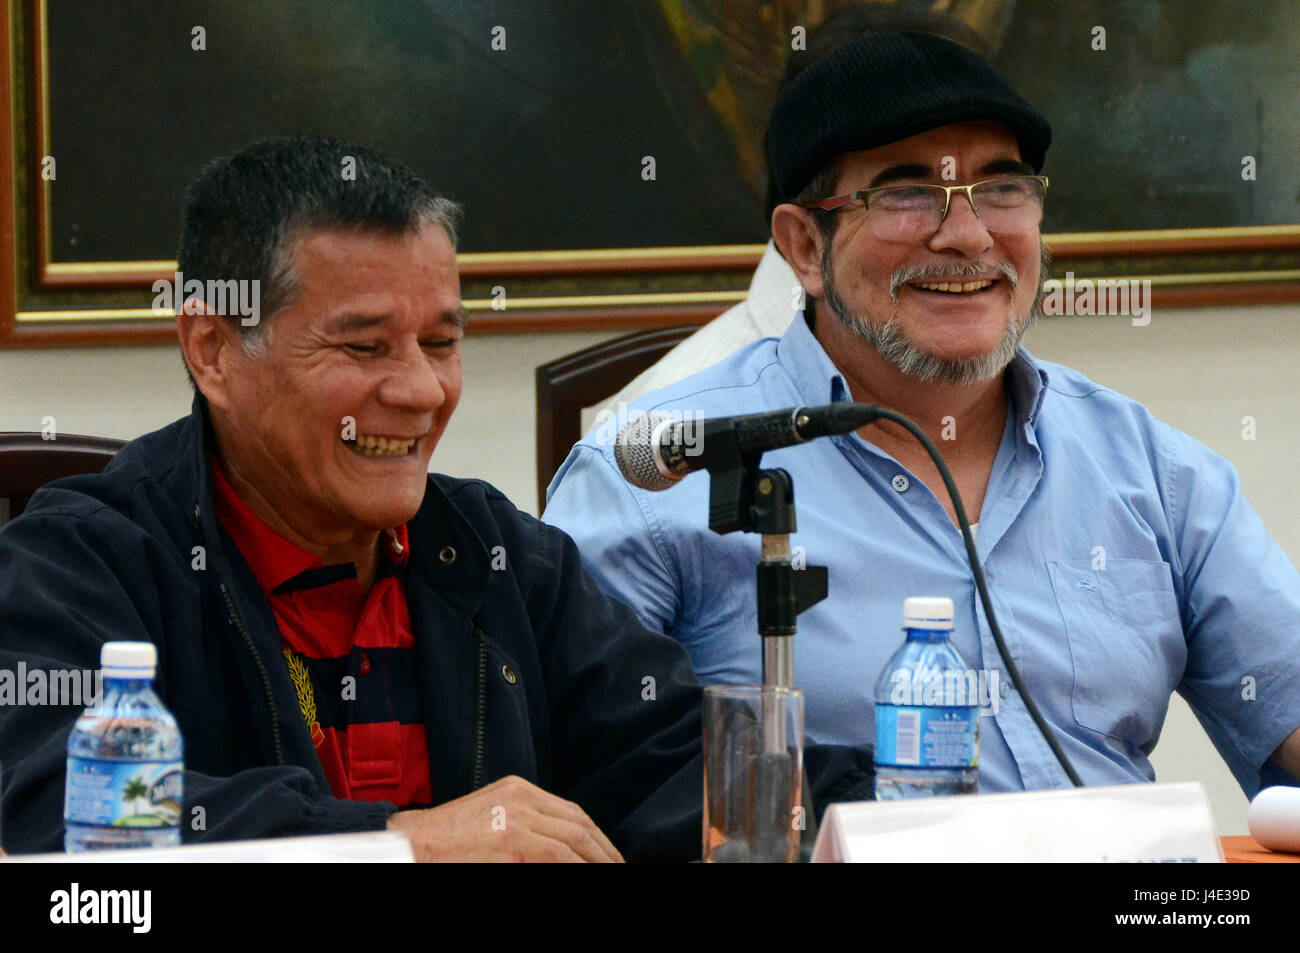 Havana, Cuba. 11th May, 2017. Rodrigo Londono (R), who is also known as Timoleon Jimenez, leader of the Revolutionary Armed Forces of Colombia (FARC), and Nicolas Rodriguez, commander of the National Liberation Army (ELN), attend a joint press conference in Havana, Cuba, on May 11, 2017. Colombia's top guerrilla groups on Thursday called for an end to political violence in the South American nation as well as the complete implementation of a peace process that will end over 50 years of armed conflict. Credit: Joaquin Hernandez/Xinhua/Alamy Live News Stock Photo